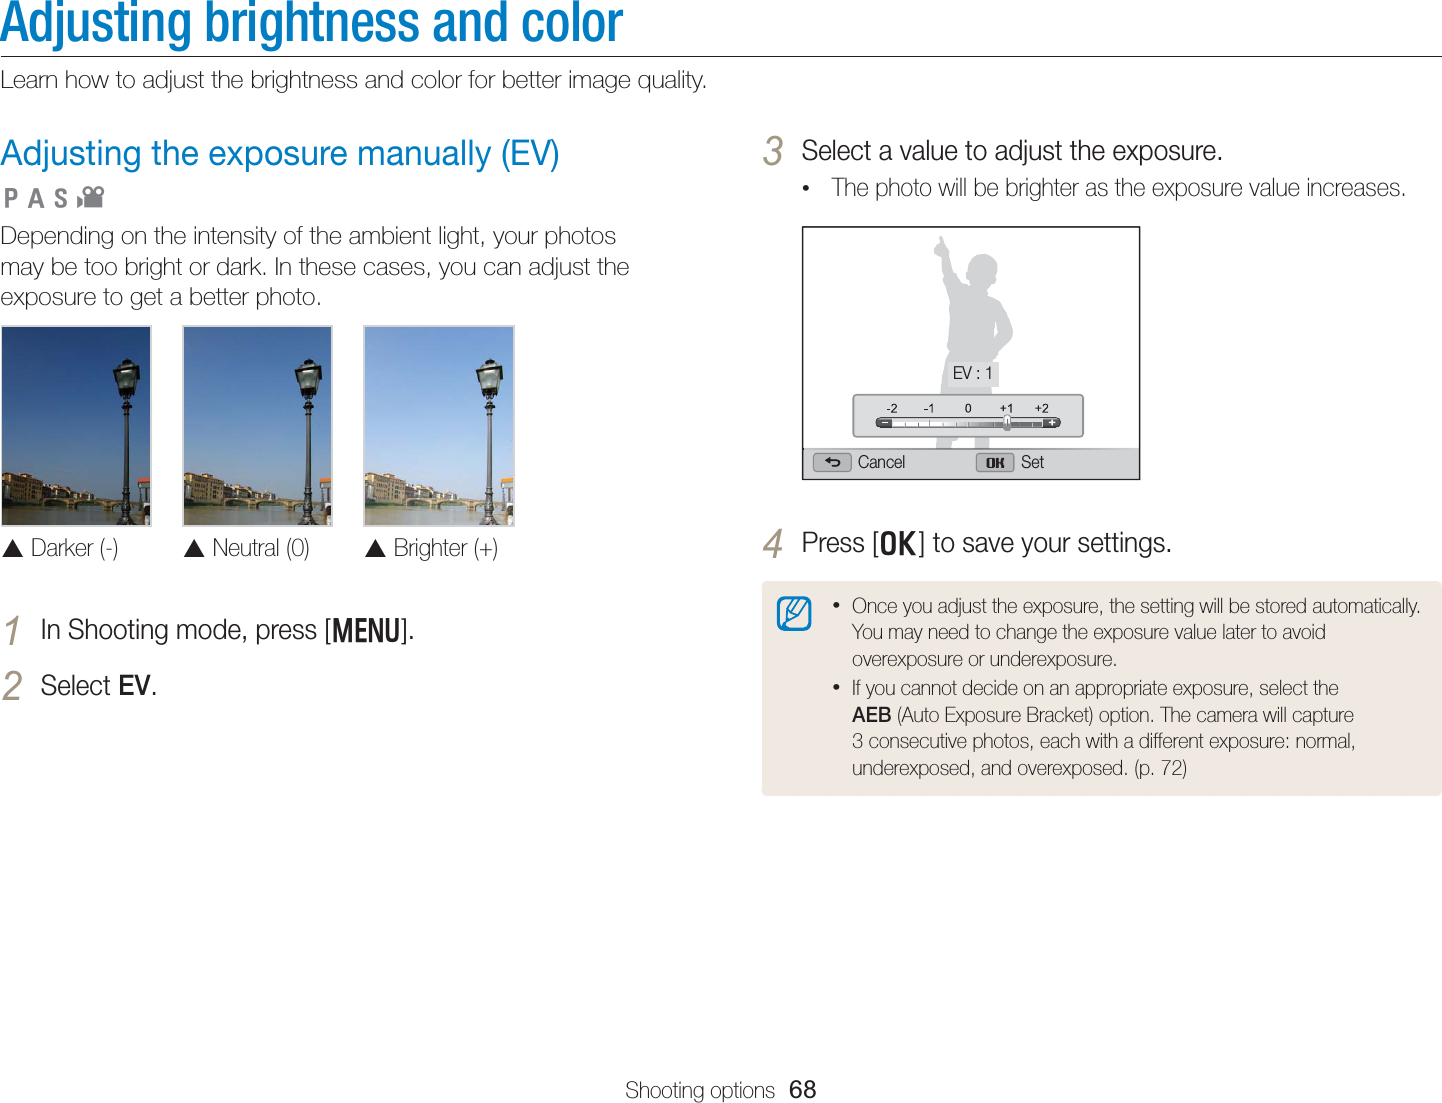 Shooting options  68Adjusting brightness and colorLearn how to adjust the brightness and color for better image quality.3 Select a value to adjust the exposure.• The photo will be brighter as the exposure value increases.Cancel SetEV : 14 Press [o] to save your settings.• Once you adjust the exposure, the setting will be stored automatically. You may need to change the exposure value later to avoid overexposure or underexposure.• If you cannot decide on an appropriate exposure, select the AEB (Auto Exposure Bracket) option. The camera will capture 3 consecutive photos, each with a different exposure: normal, underexposed, and overexposed. (p. 72)Adjusting the exposure manually (EV) Depending on the intensity of the ambient light, your photos may be too bright or dark. In these cases, you can adjust the exposure to get a better photo. S Darker (-)S Neutral (0)S Brighter (+)1 In Shooting mode, press [m].2 Select EV.  pAhv